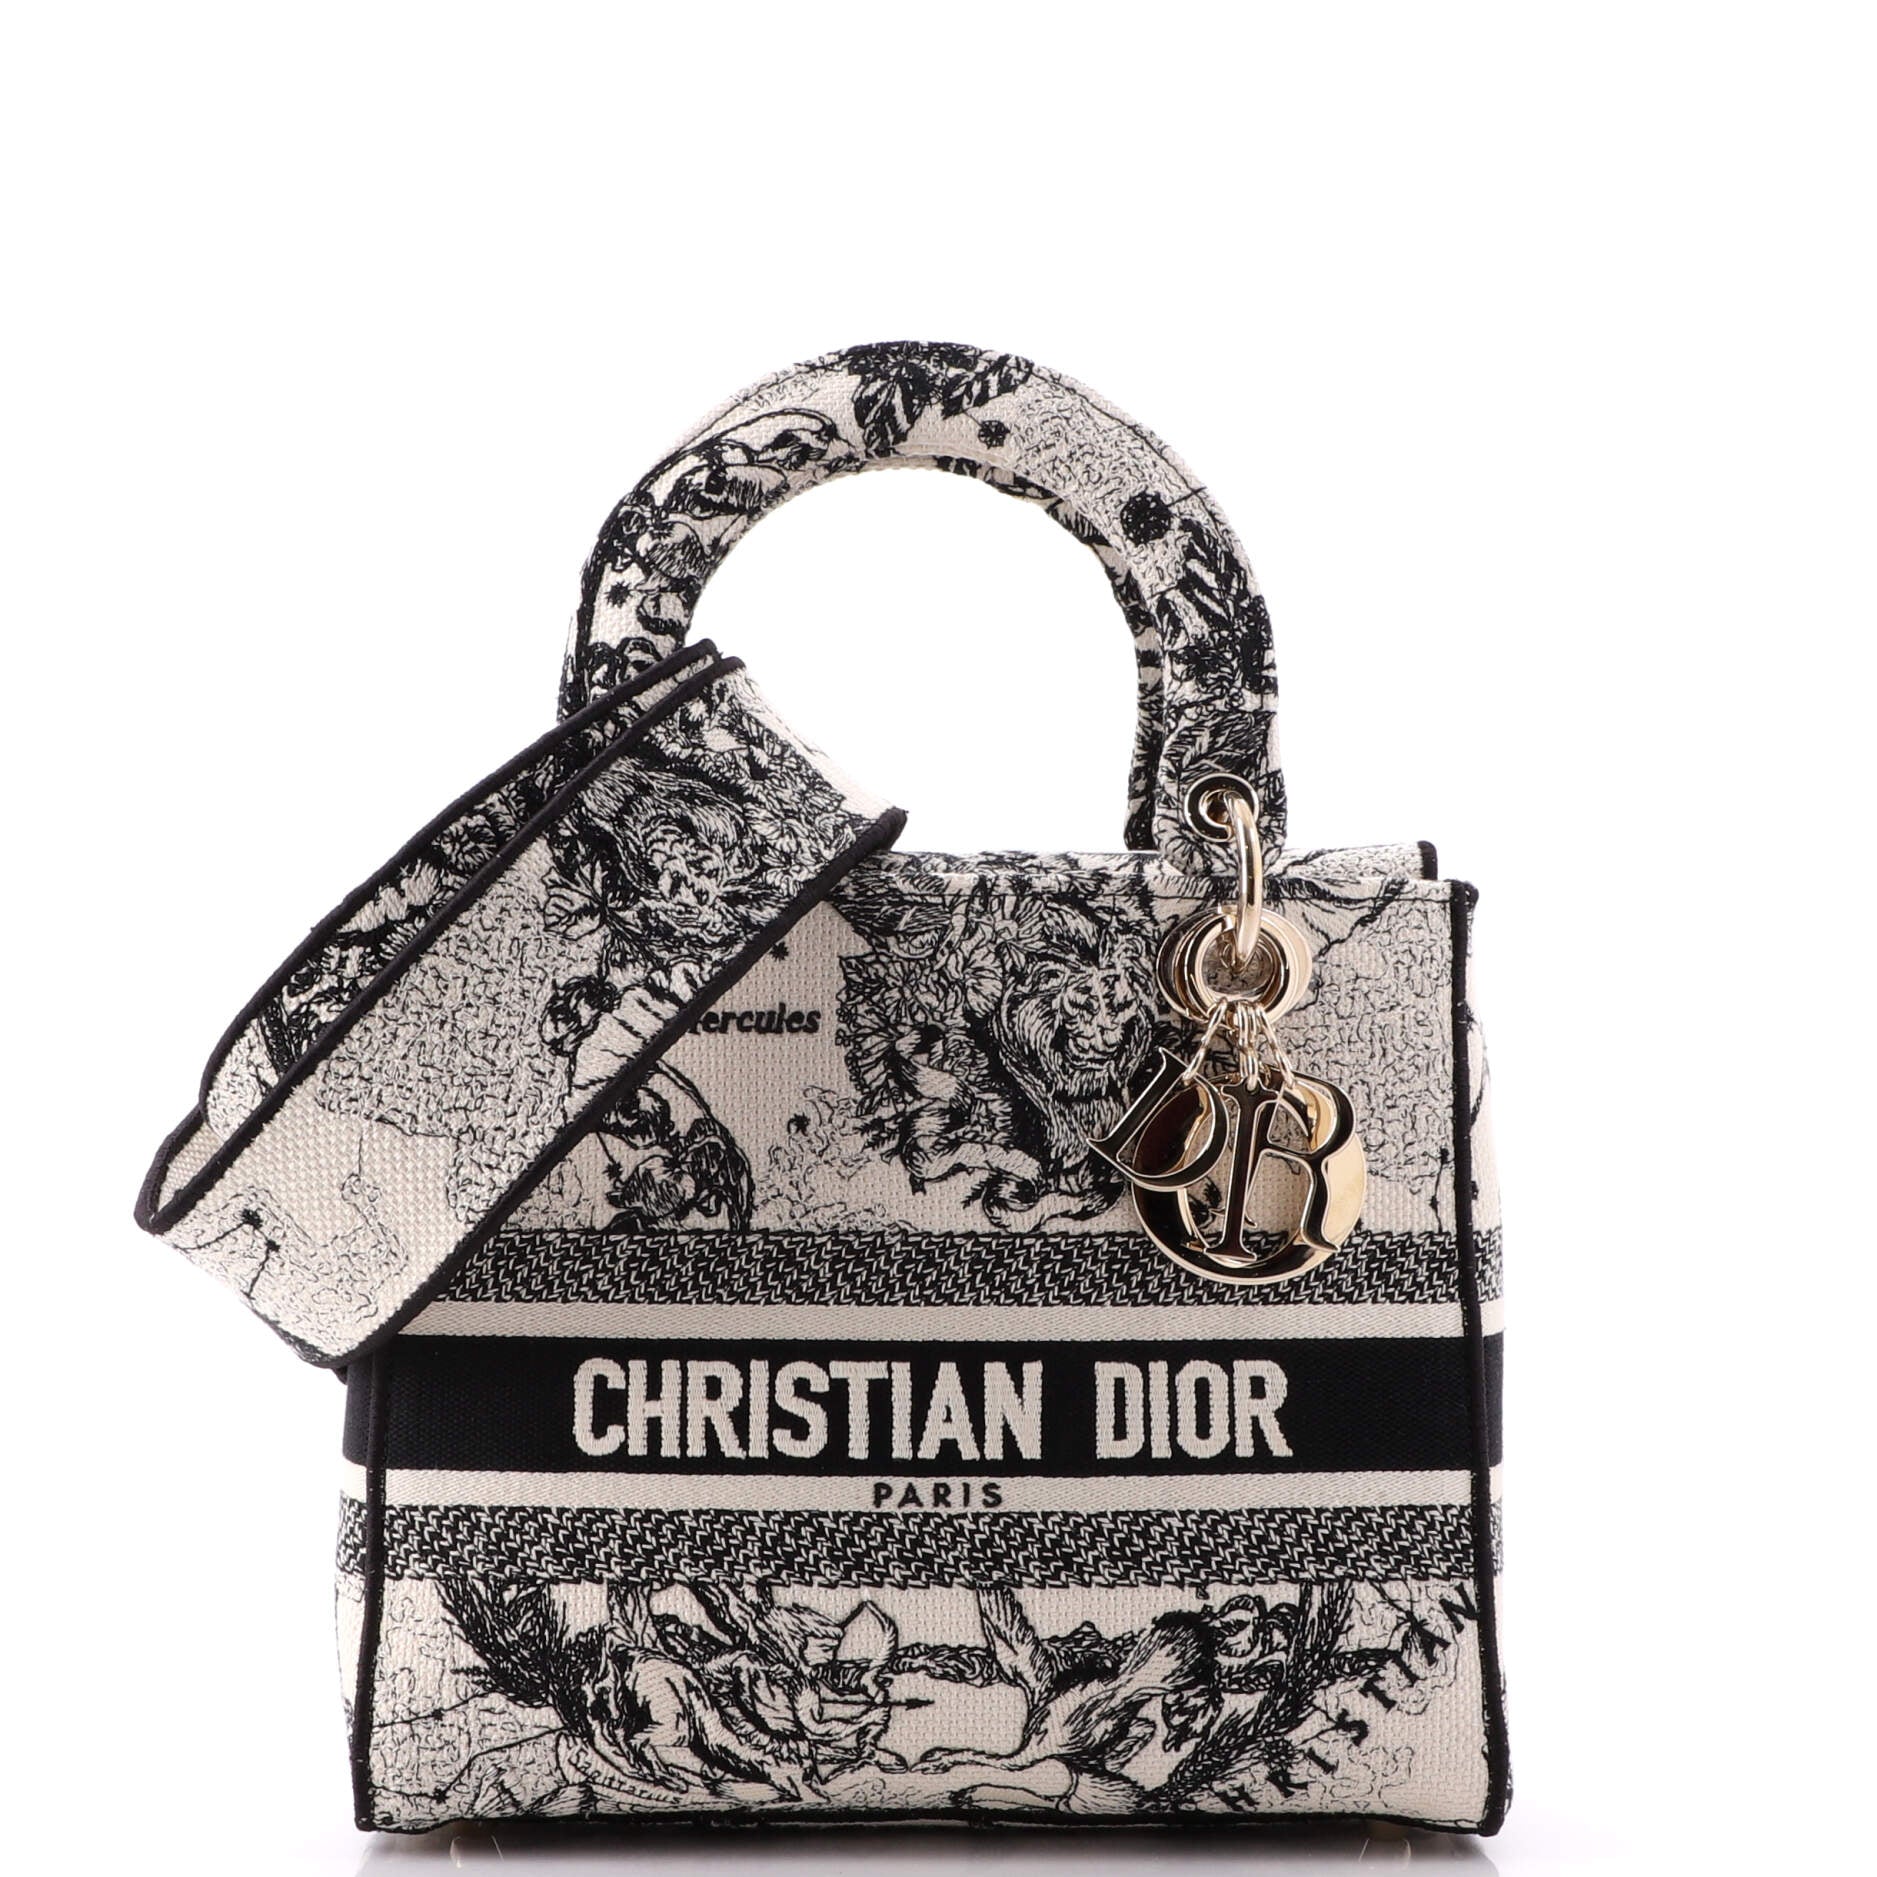 Christian Dior Black Leather Air Embroidered and Beaded Medium Lady Dior Bag   Yoogis Closet  Lady dior bag Bags Elegant bags